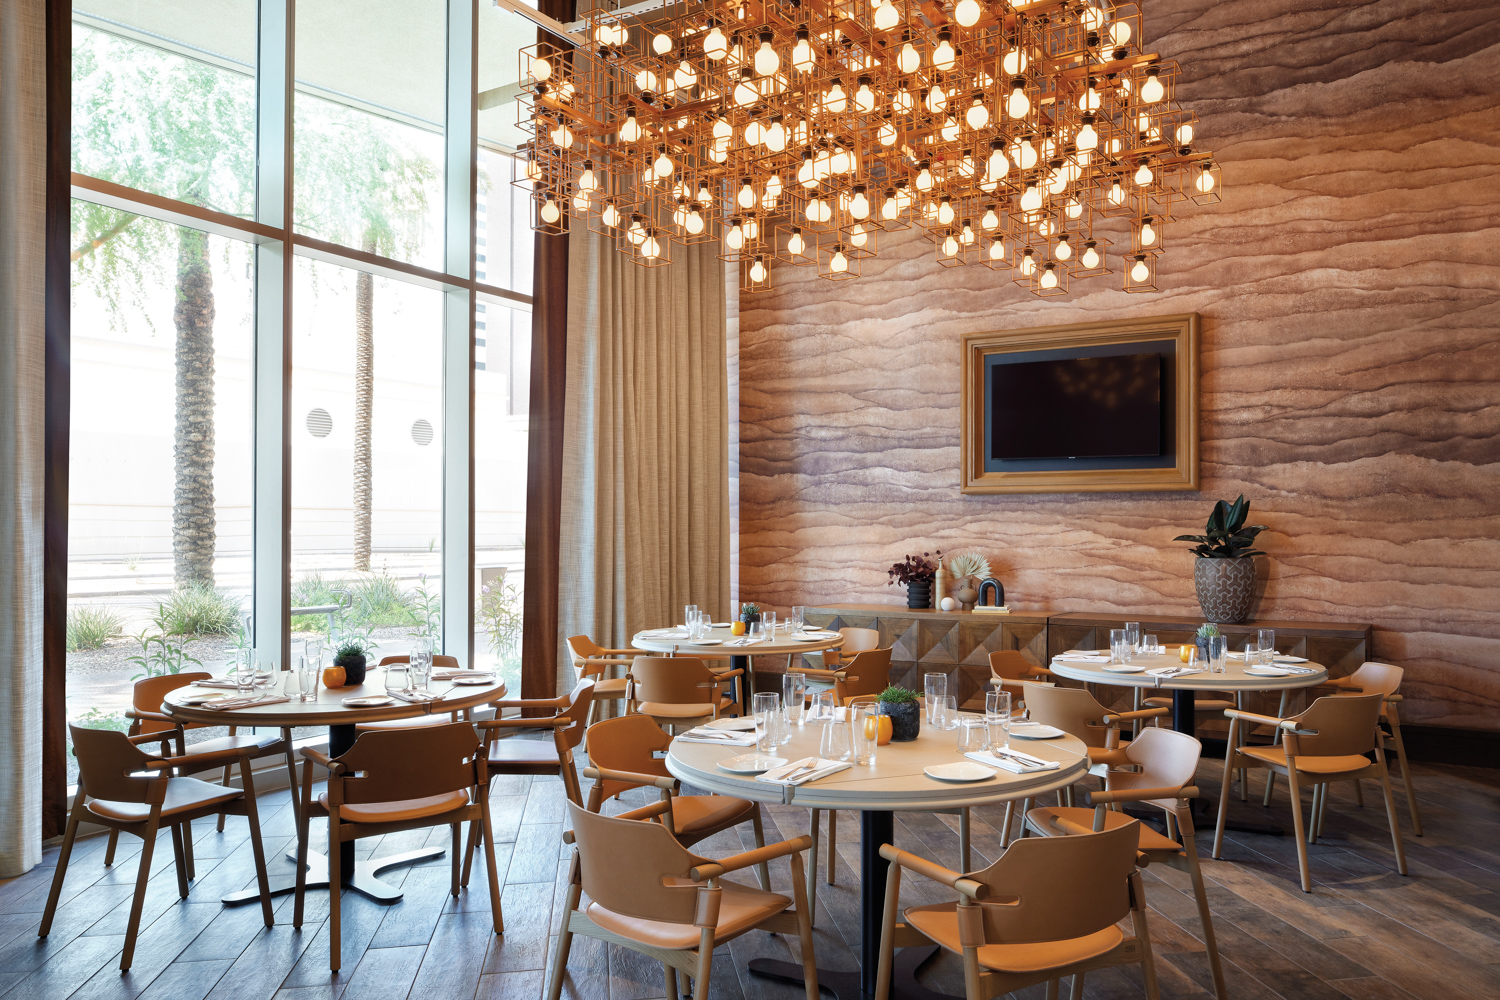 Restaurant with rammed-earth wallcovering and oversize chandelier